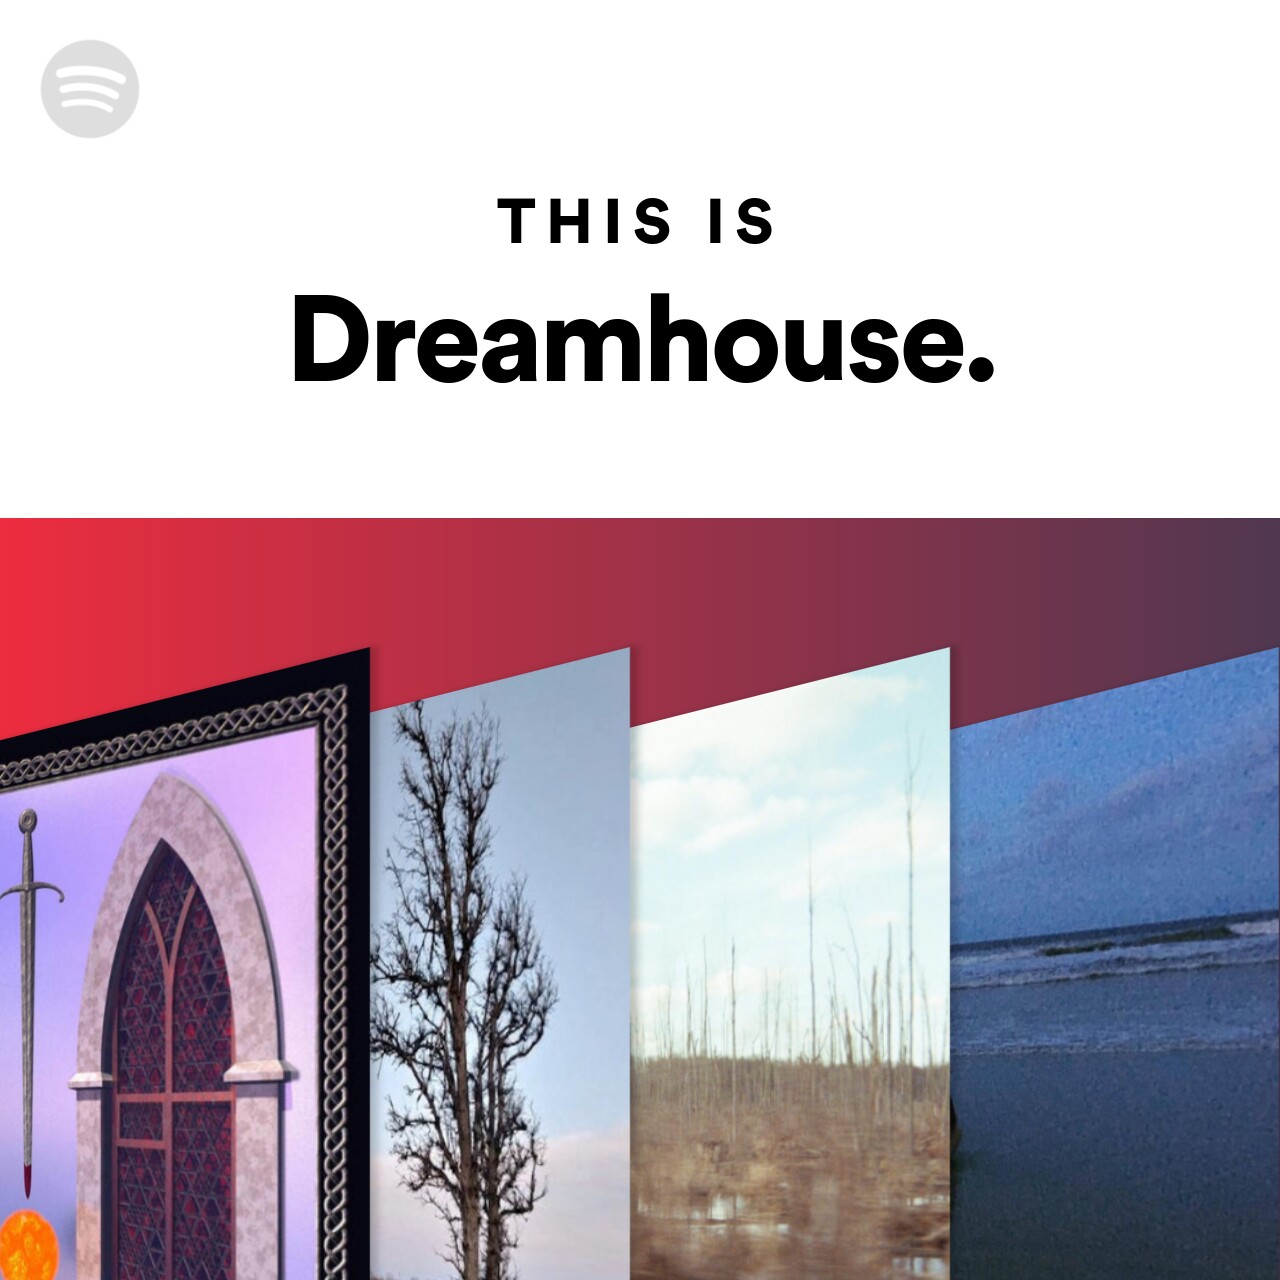 This Is Dreamhouse.